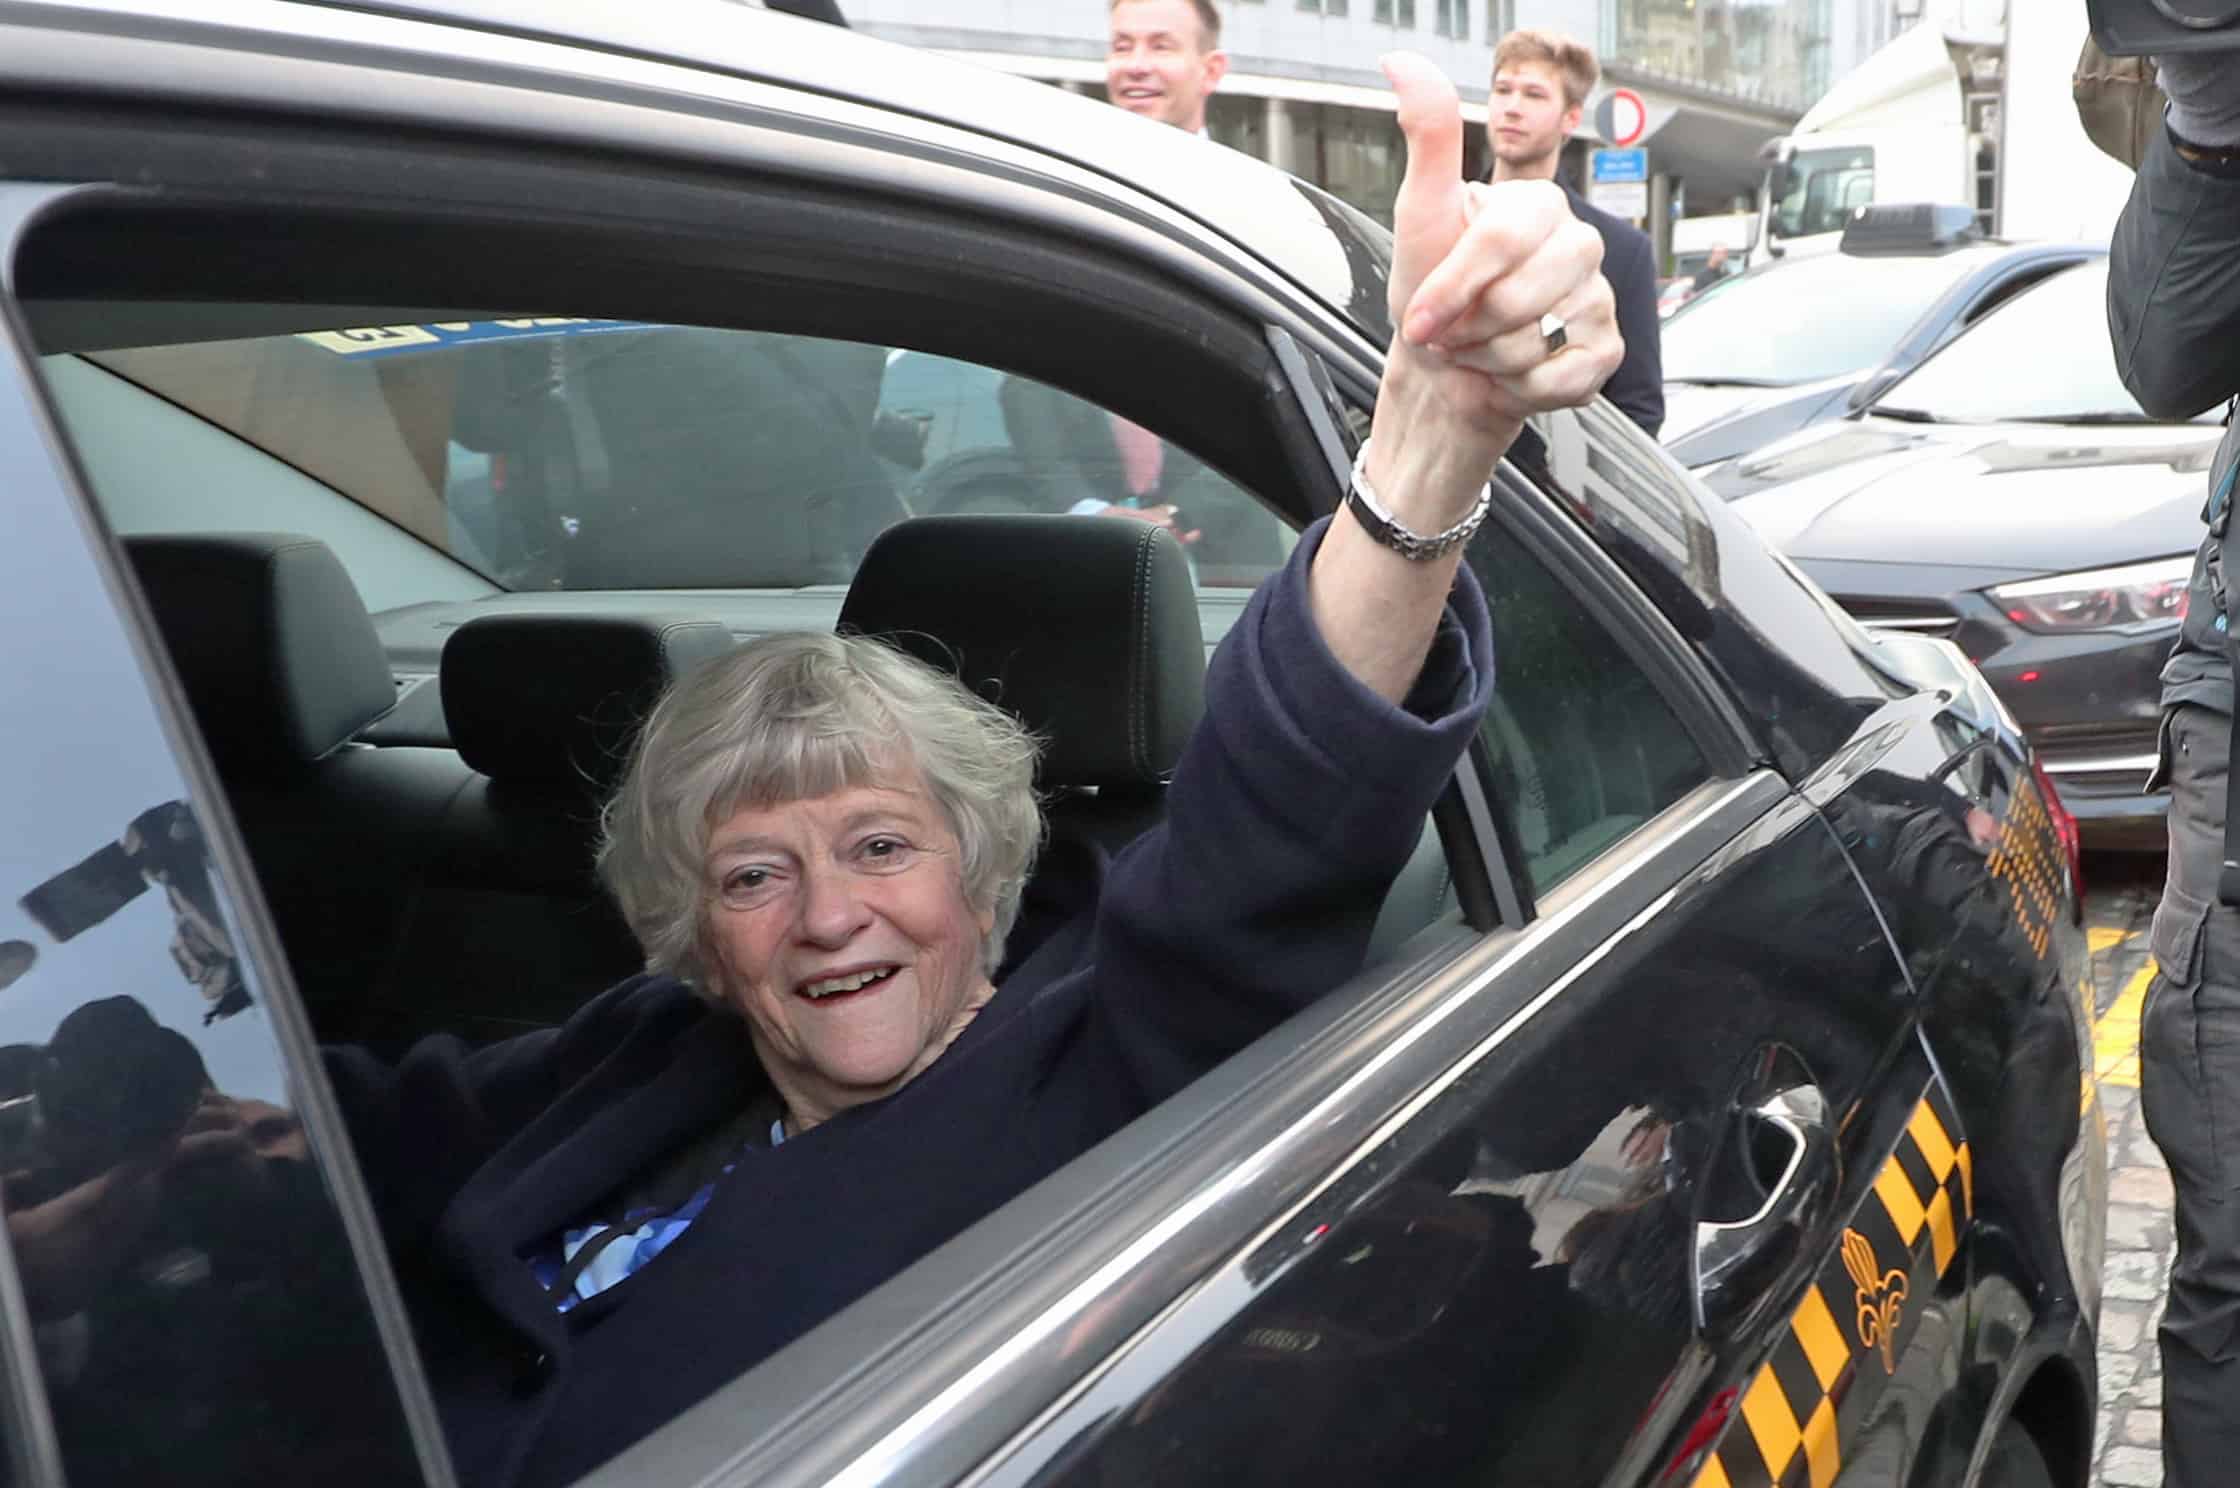 Ann Widdecombe joins Reform UK to ‘save the Union’